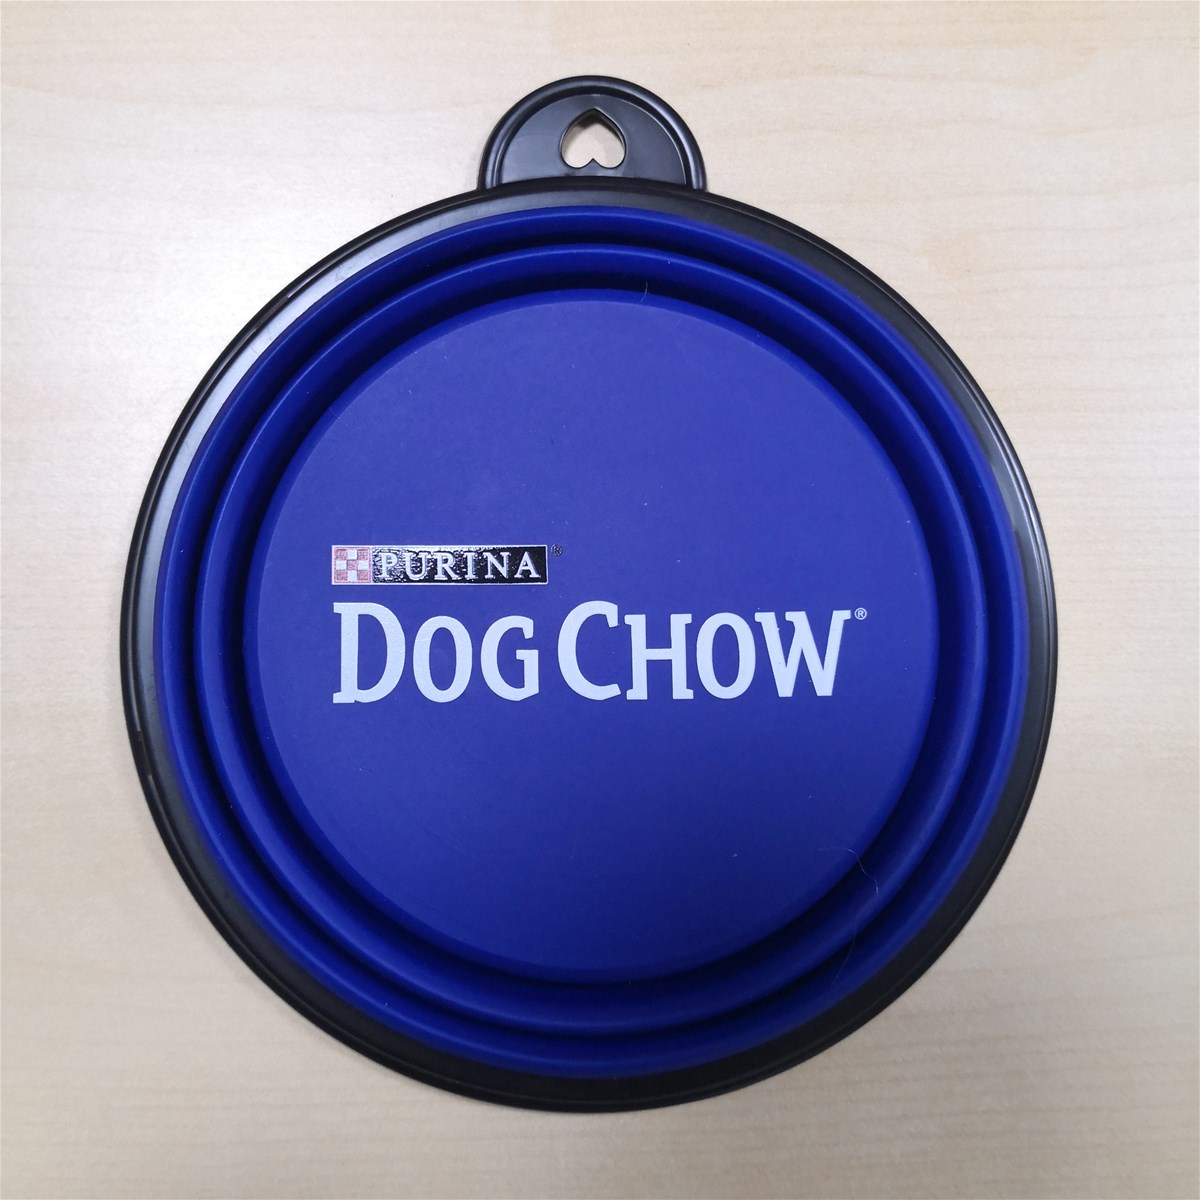 retractable silicone pet bowel vivid colors available small moq of 1K with customized branding and packing service